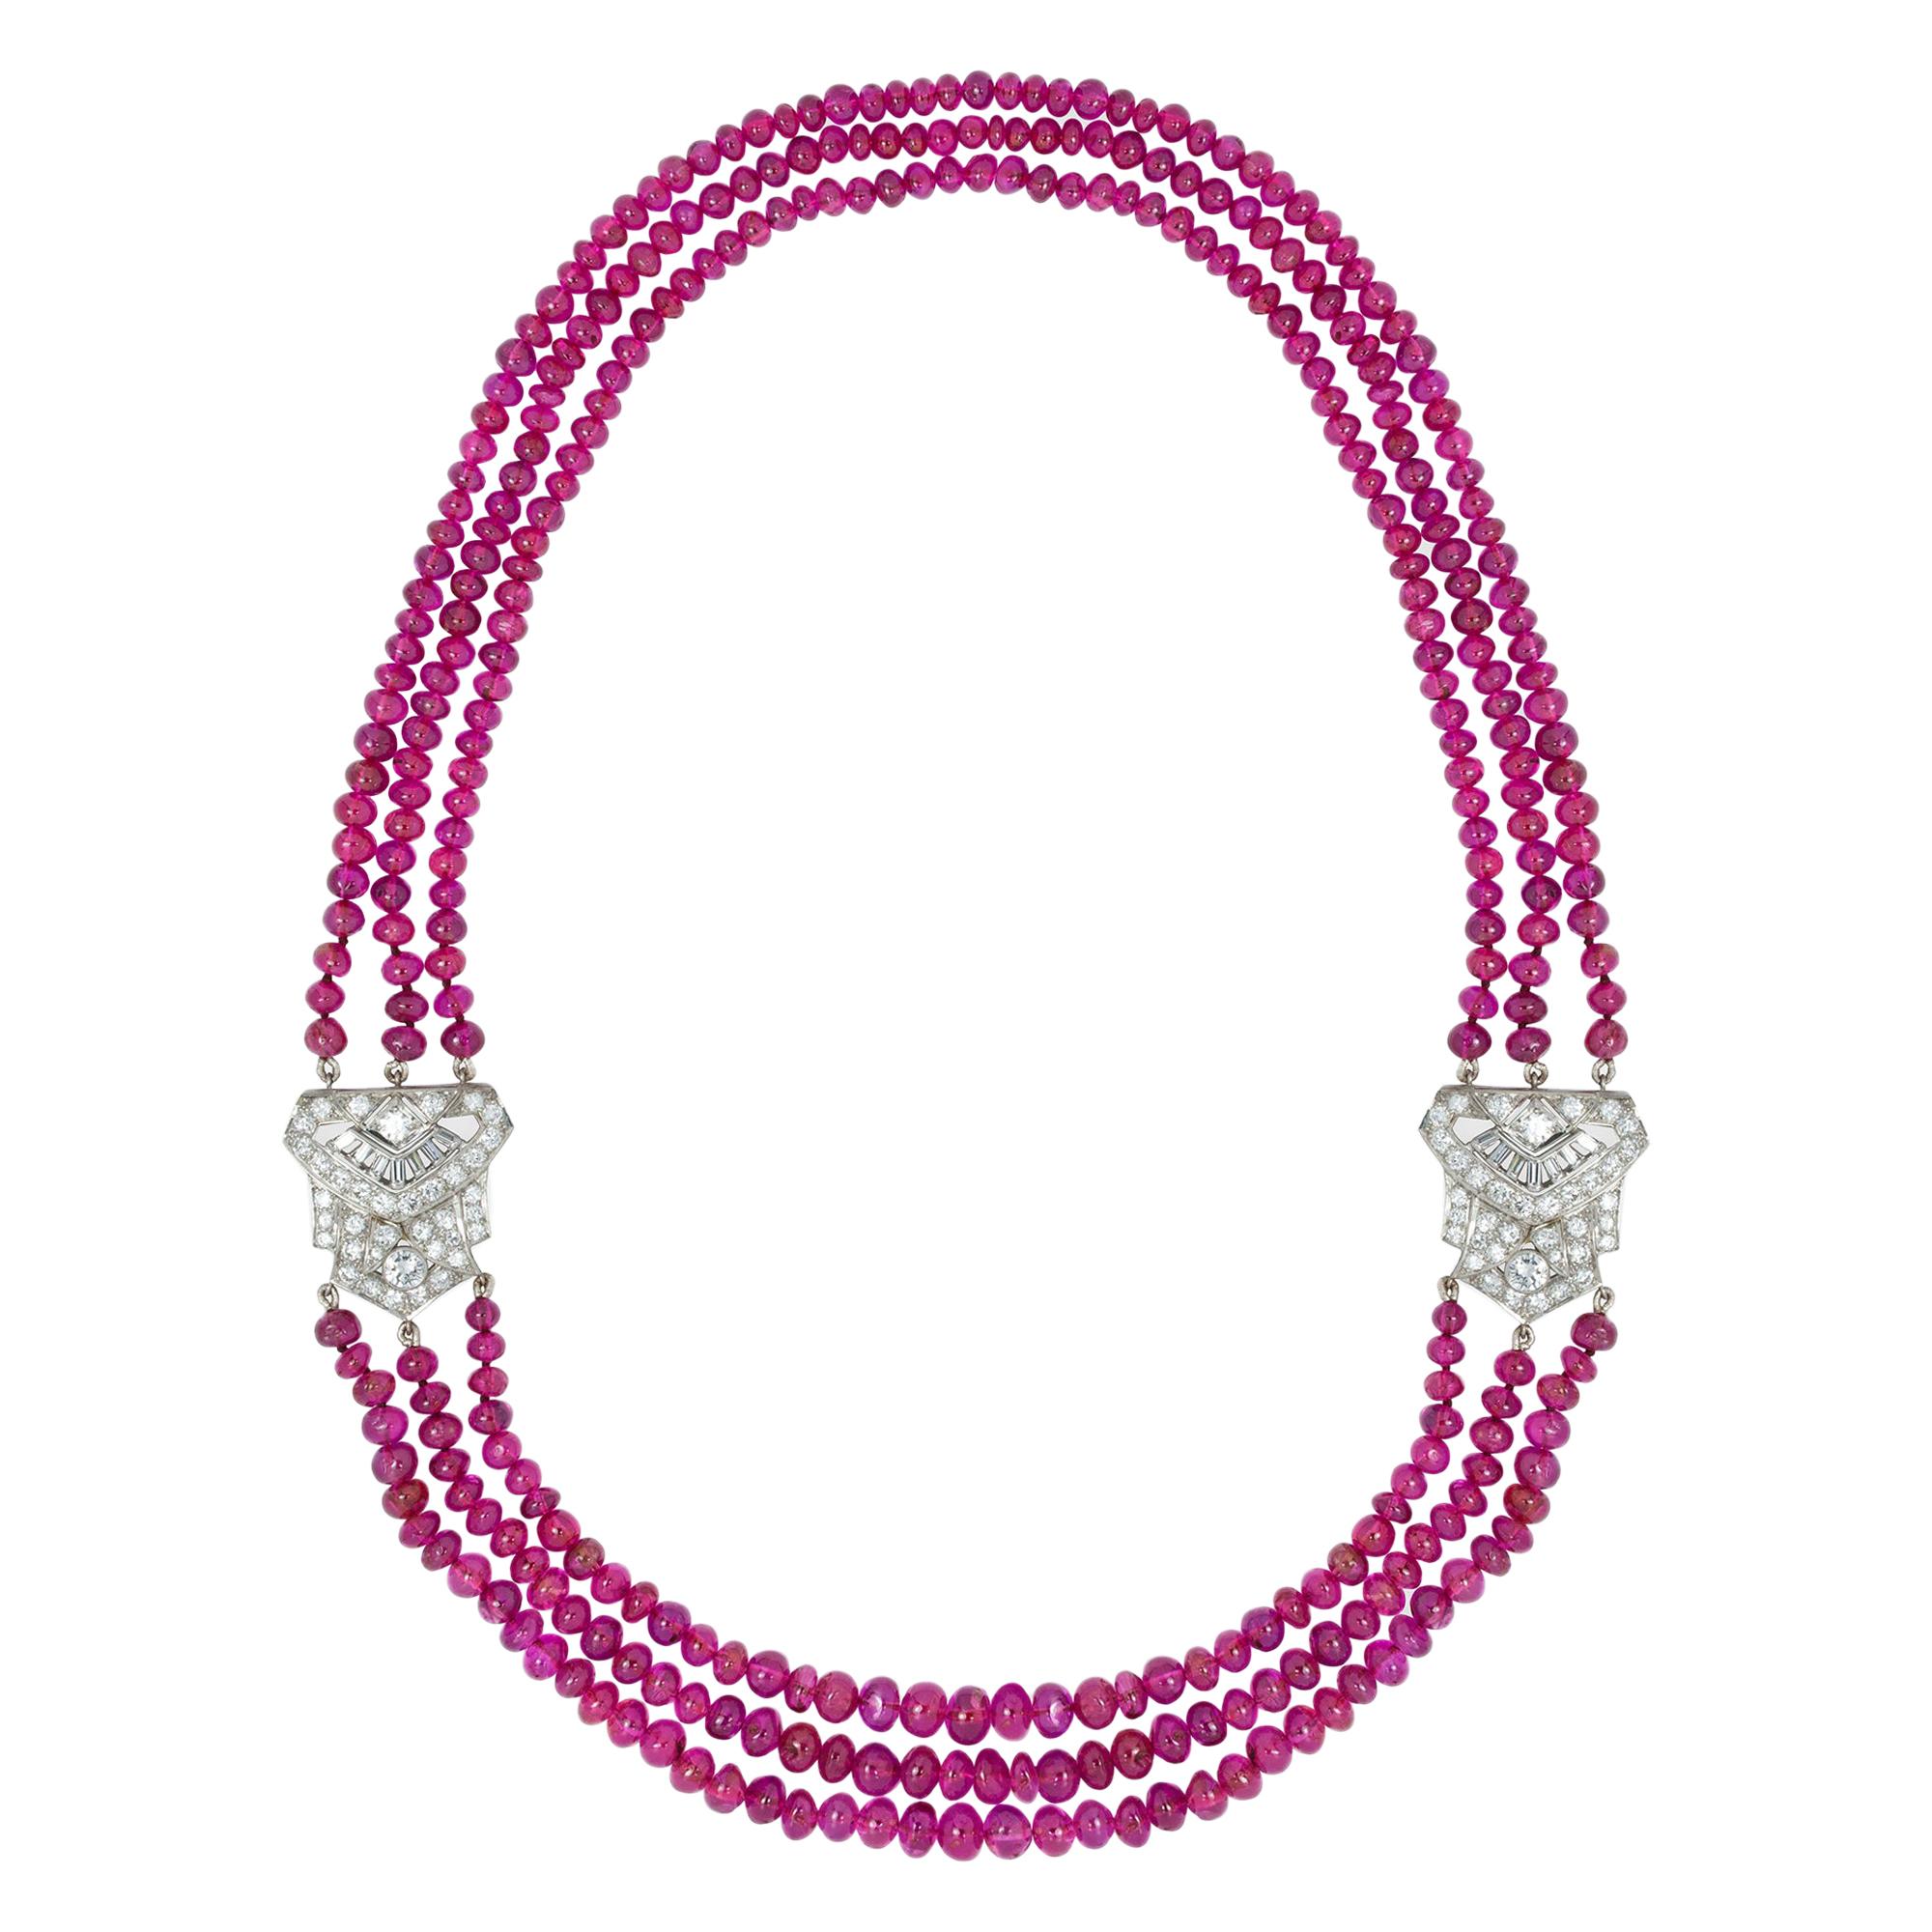 Important Art-Deco Ruby Bead Triple Strand Necklace